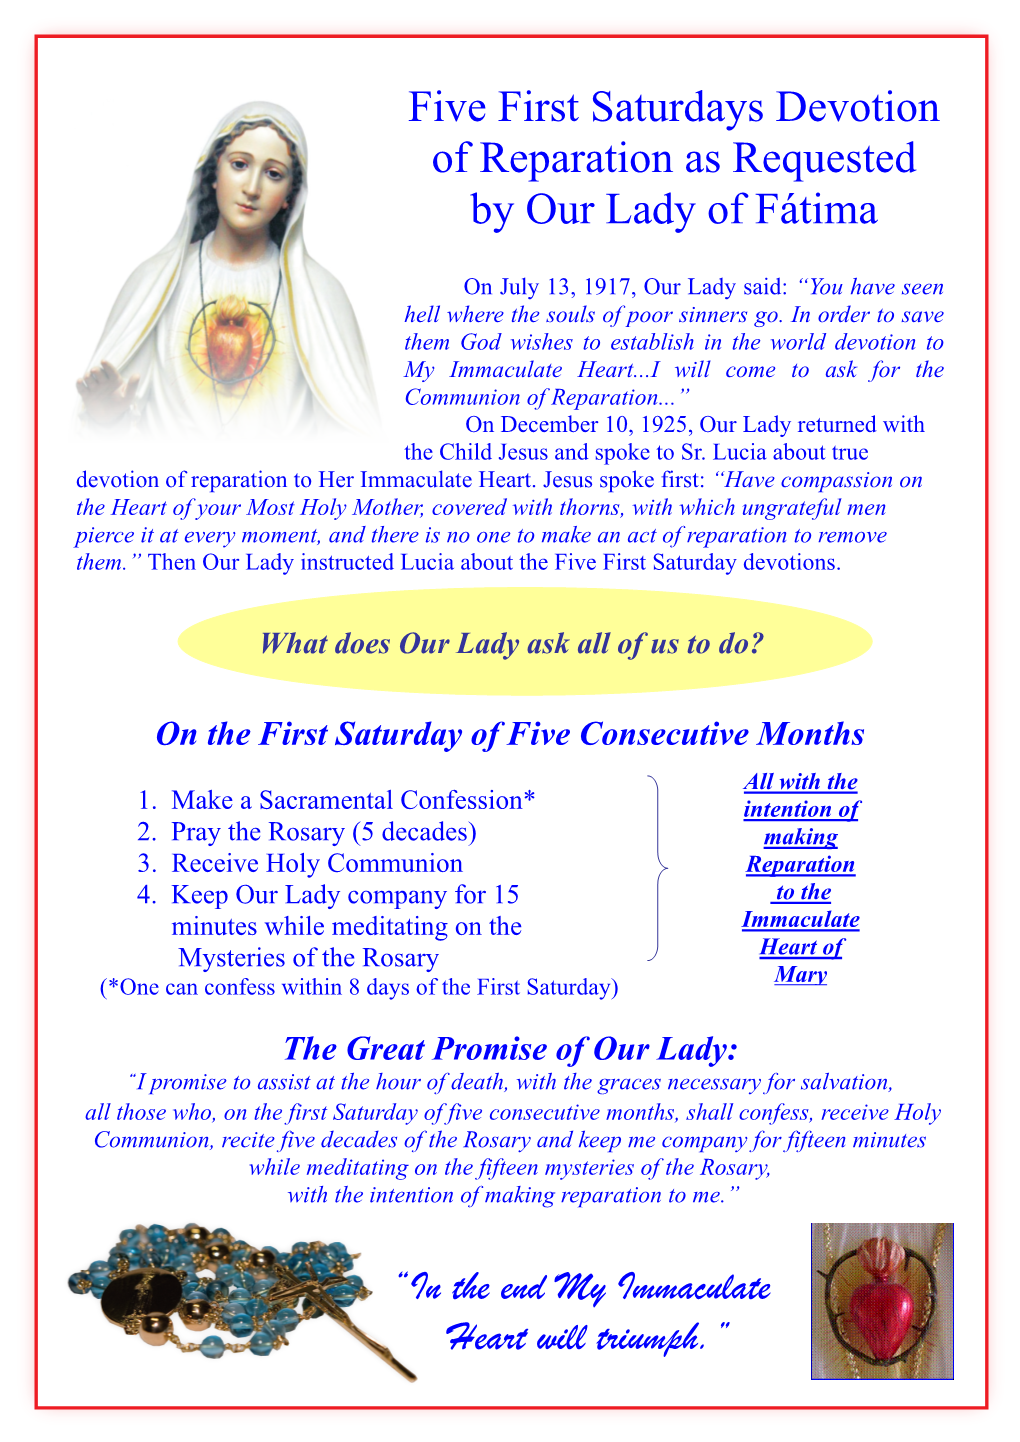 Five First Saturdays Devotion of Reparation As Requested by Our Lady of Fátima